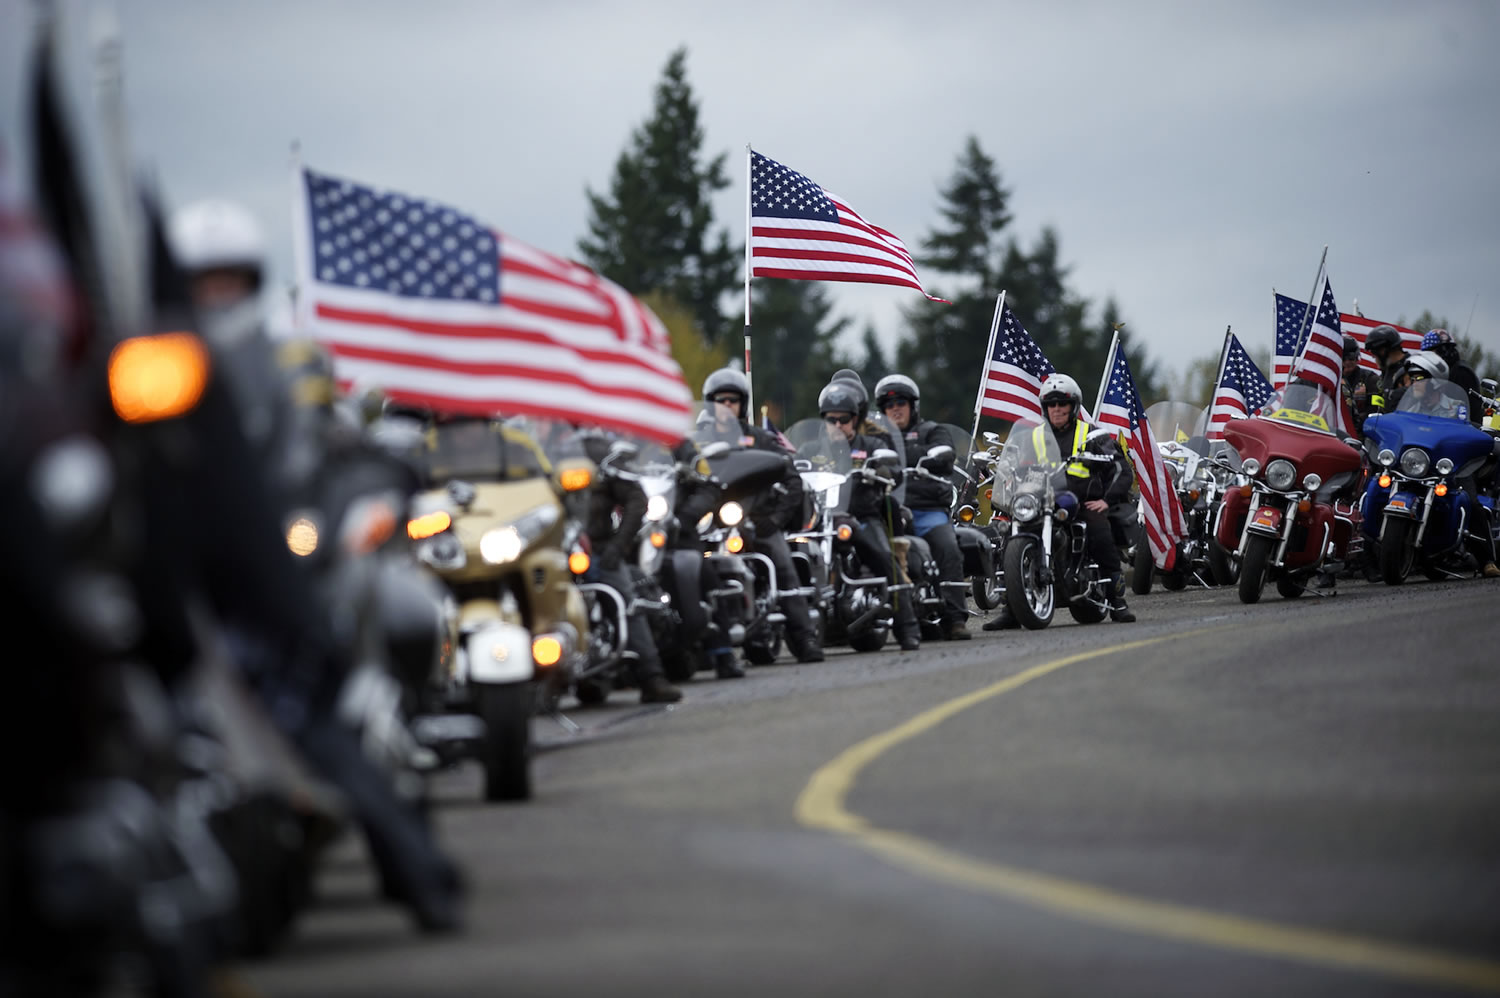 About 150 riders and drivers were in the Veterans Convoy on Sunday.